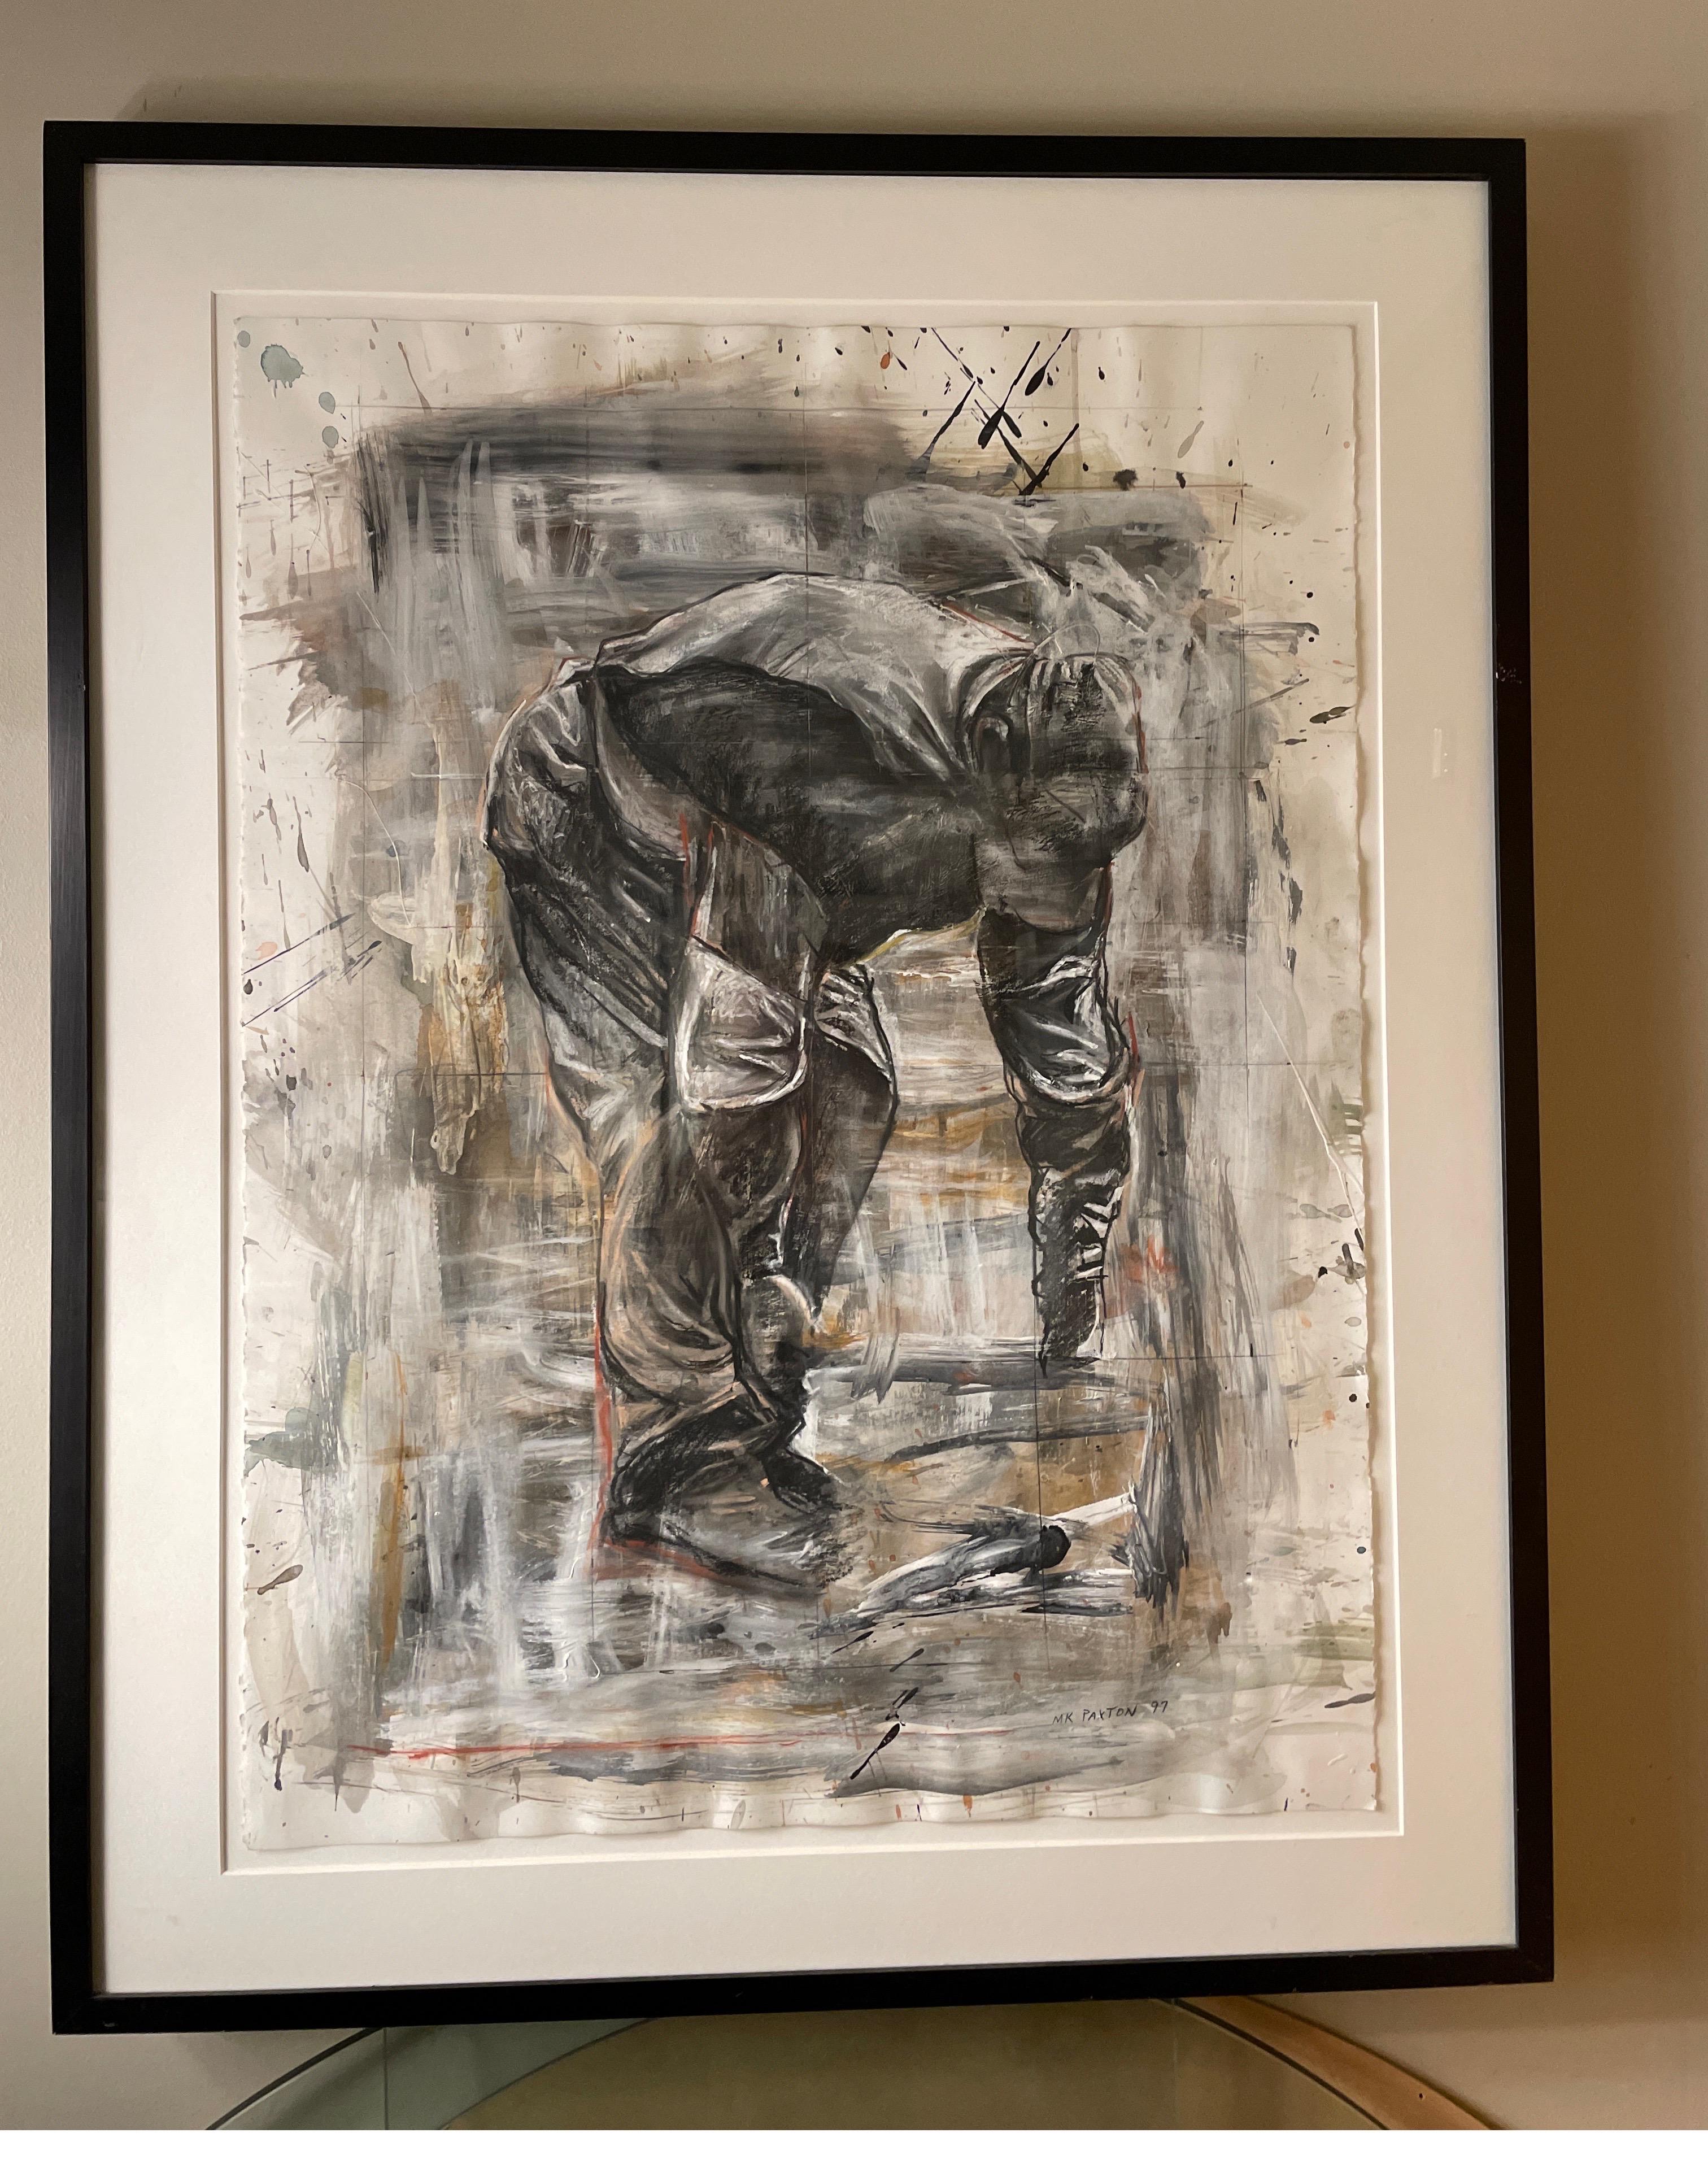 A mixed media ( ink, watercolors and charcoal) piece of art by Michael K Paxton from a series titled “worker”